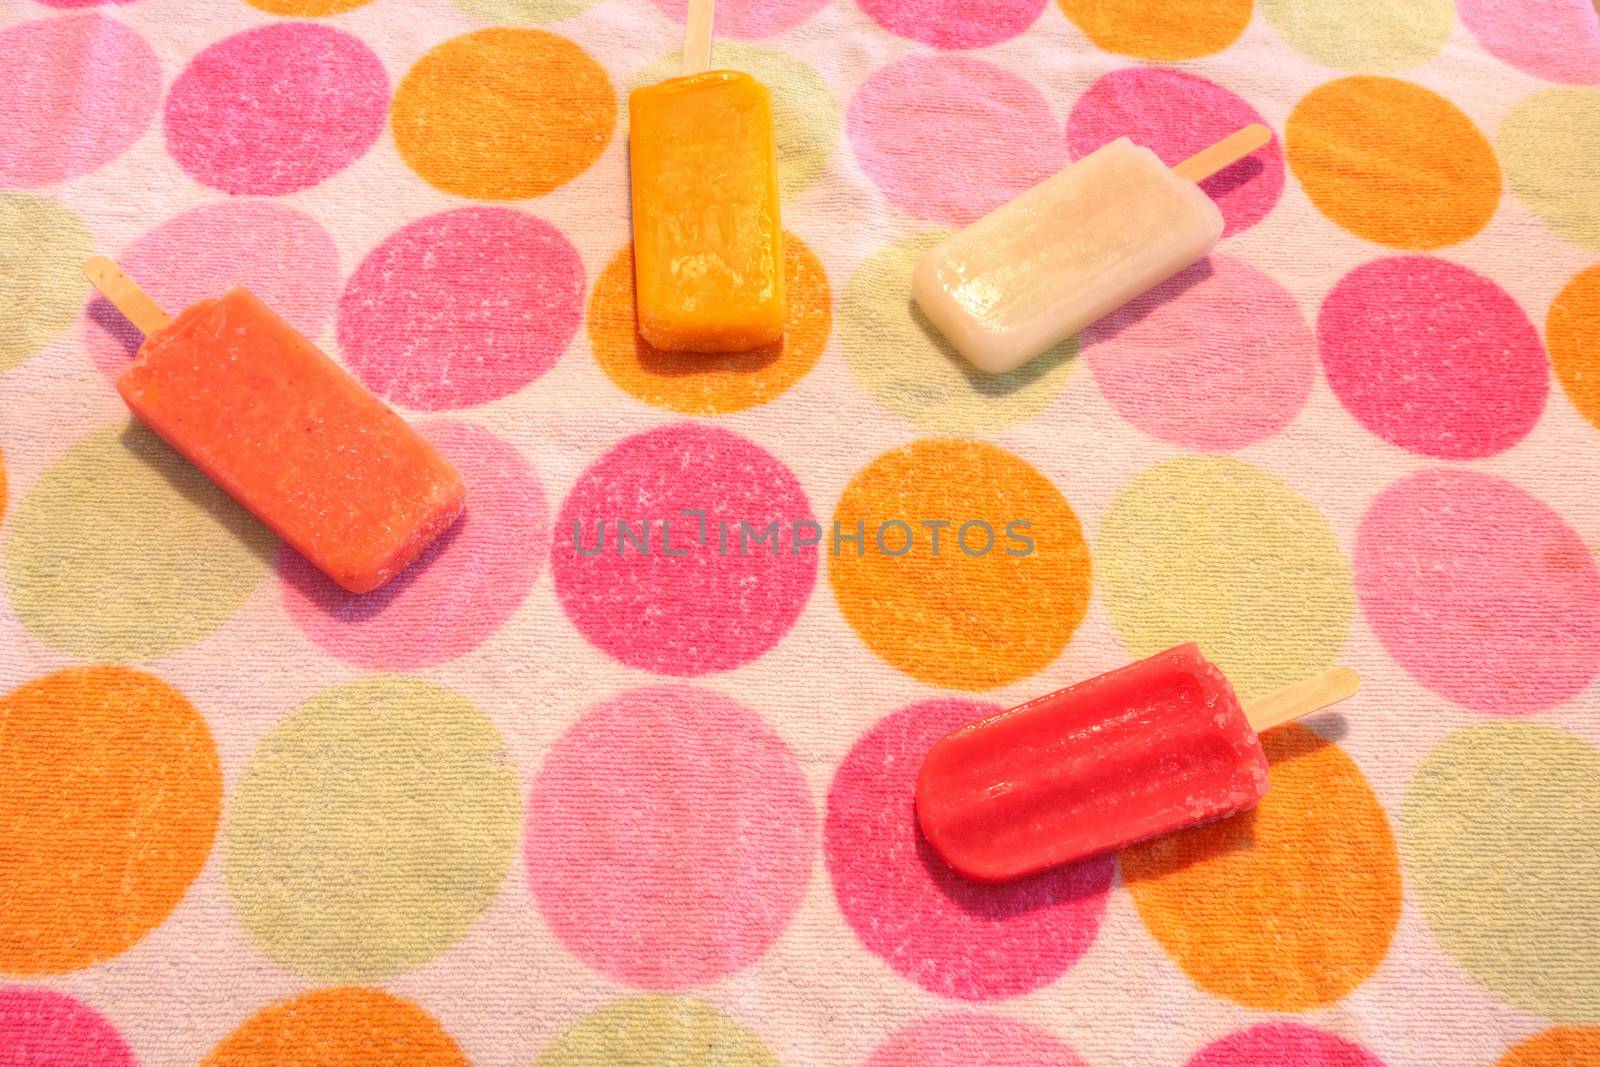 Fruit popsicles on a dotted background in summer including watermelon popsicle, tropical fruit popsicle, mango popsicle, and lime popsicle with fresh raspberries.